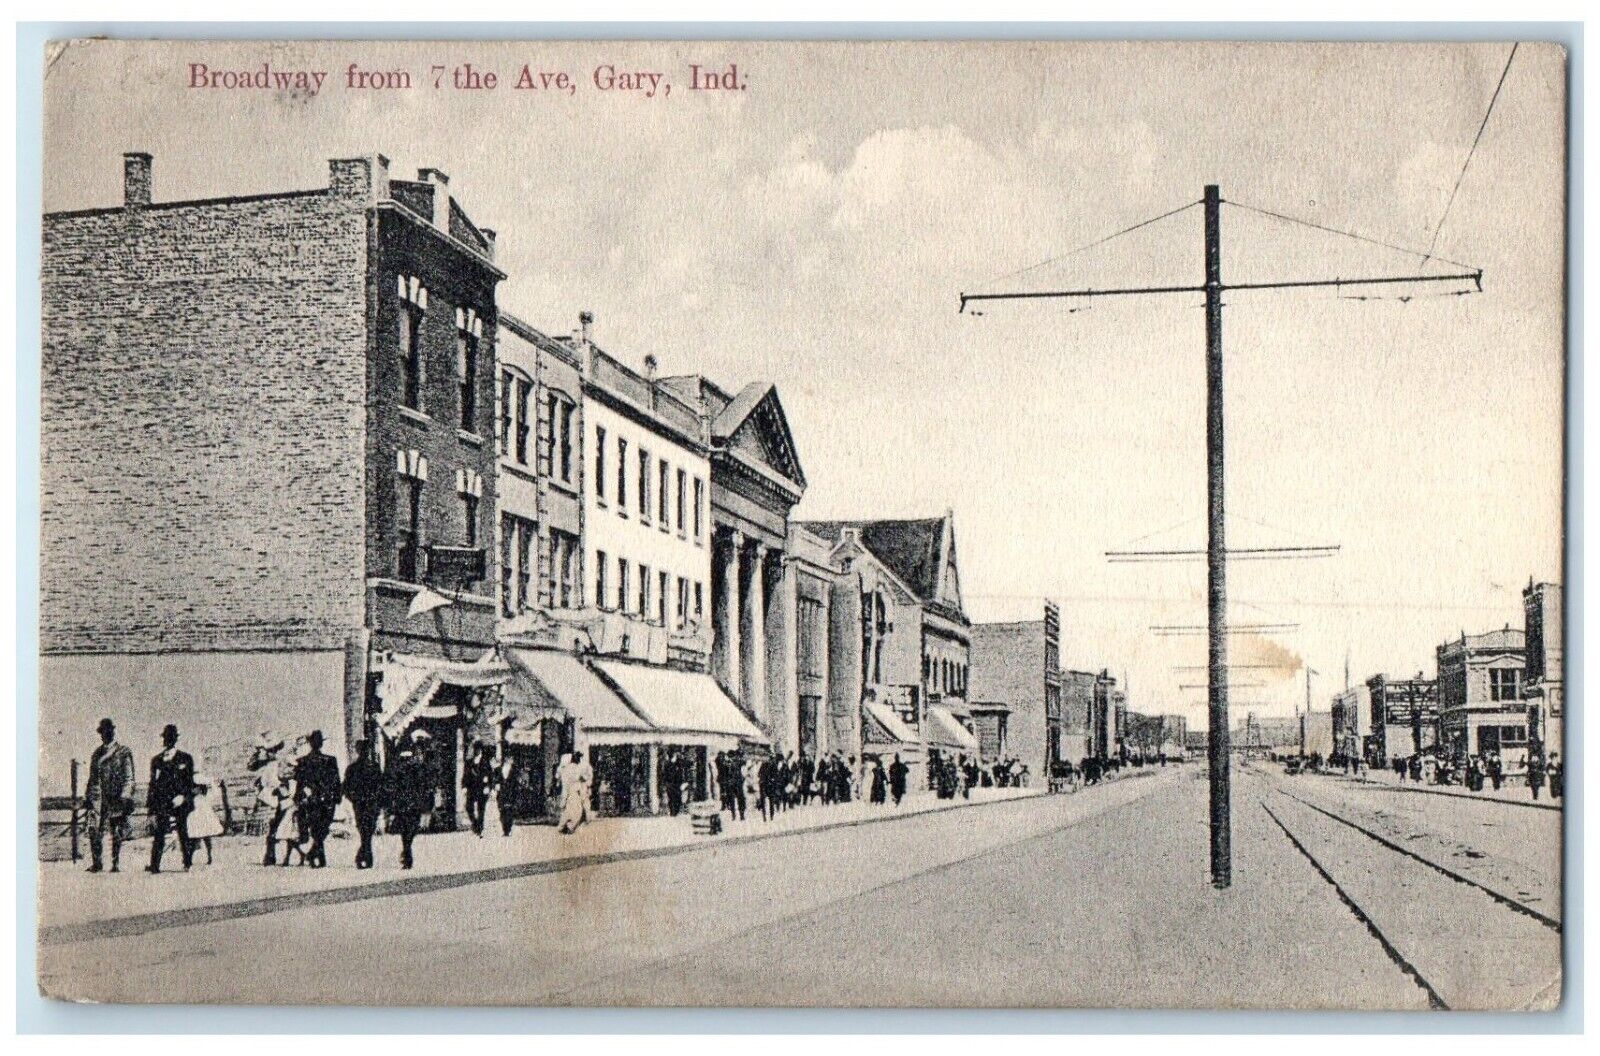 c1910 Busy Day Street Building Broadway 7th Ave Gary Indiana IN Vintage Postcard